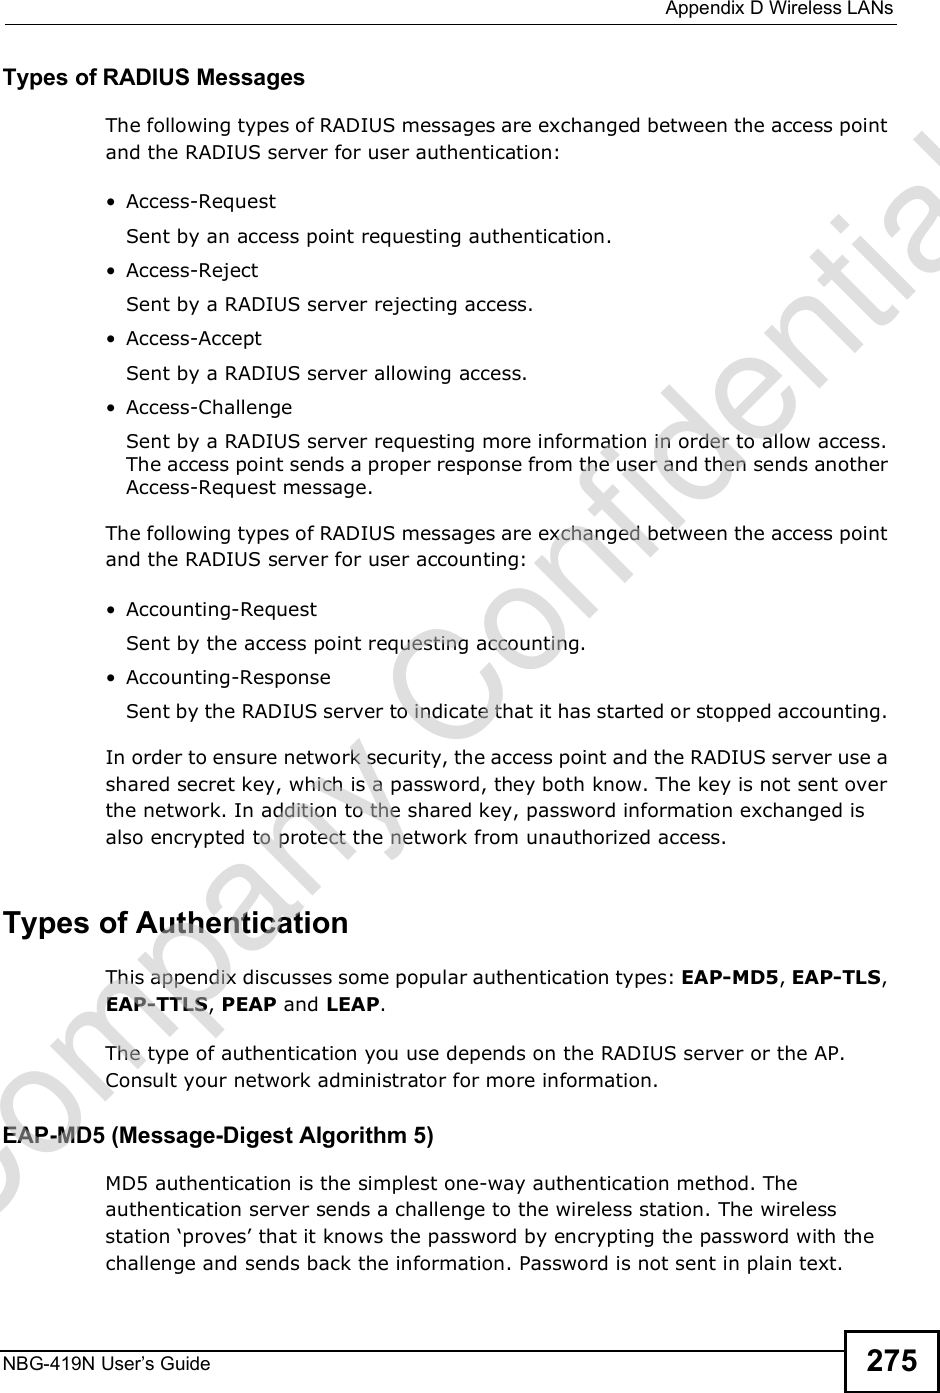  Appendix DWireless LANsNBG-419N User s Guide 275Types of RADIUS MessagesThe following types of RADIUS messages are exchanged between the access point and the RADIUS server for user authentication: Access-RequestSent by an access point requesting authentication. Access-RejectSent by a RADIUS server rejecting access. Access-AcceptSent by a RADIUS server allowing access.  Access-ChallengeSent by a RADIUS server requesting more information in order to allow access. The access point sends a proper response from the user and then sends another Access-Request message. The following types of RADIUS messages are exchanged between the access point and the RADIUS server for user accounting: Accounting-RequestSent by the access point requesting accounting. Accounting-ResponseSent by the RADIUS server to indicate that it has started or stopped accounting. In order to ensure network security, the access point and the RADIUS server use a shared secret key, which is a password, they both know. The key is not sent over the network. In addition to the shared key, password information exchanged is also encrypted to protect the network from unauthorized access. Types of Authentication This appendix discusses some popular authentication types: EAP-MD5, EAP-TLS, EAP-TTLS, PEAP and LEAP. The type of authentication you use depends on the RADIUS server or the AP. Consult your network administrator for more information.EAP-MD5 (Message-Digest Algorithm 5)MD5 authentication is the simplest one-way authentication method. The authentication server sends a challenge to the wireless station. The wireless station &apos;proves! that it knows the password by encrypting the password with the challenge and sends back the information. Password is not sent in plain text. Company Confidential